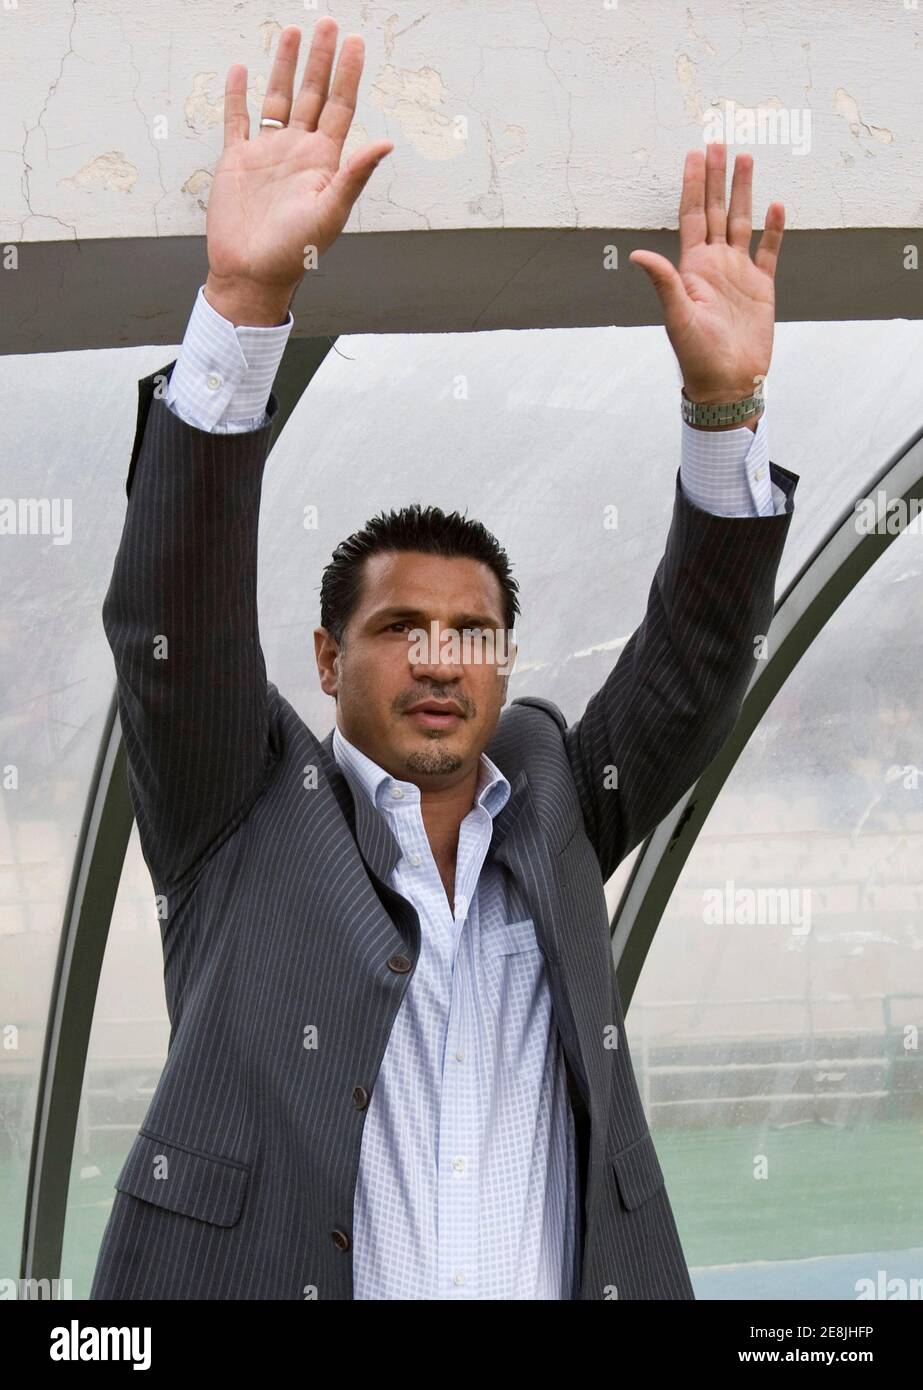 Iran's coach Ali Daei waves to fans before the start of their 2010 World Cup qualifying soccer match against North Korea in Tehran October 15, 2008. REUTERS/Raheb Homavandi (IRAN) Stock Photo